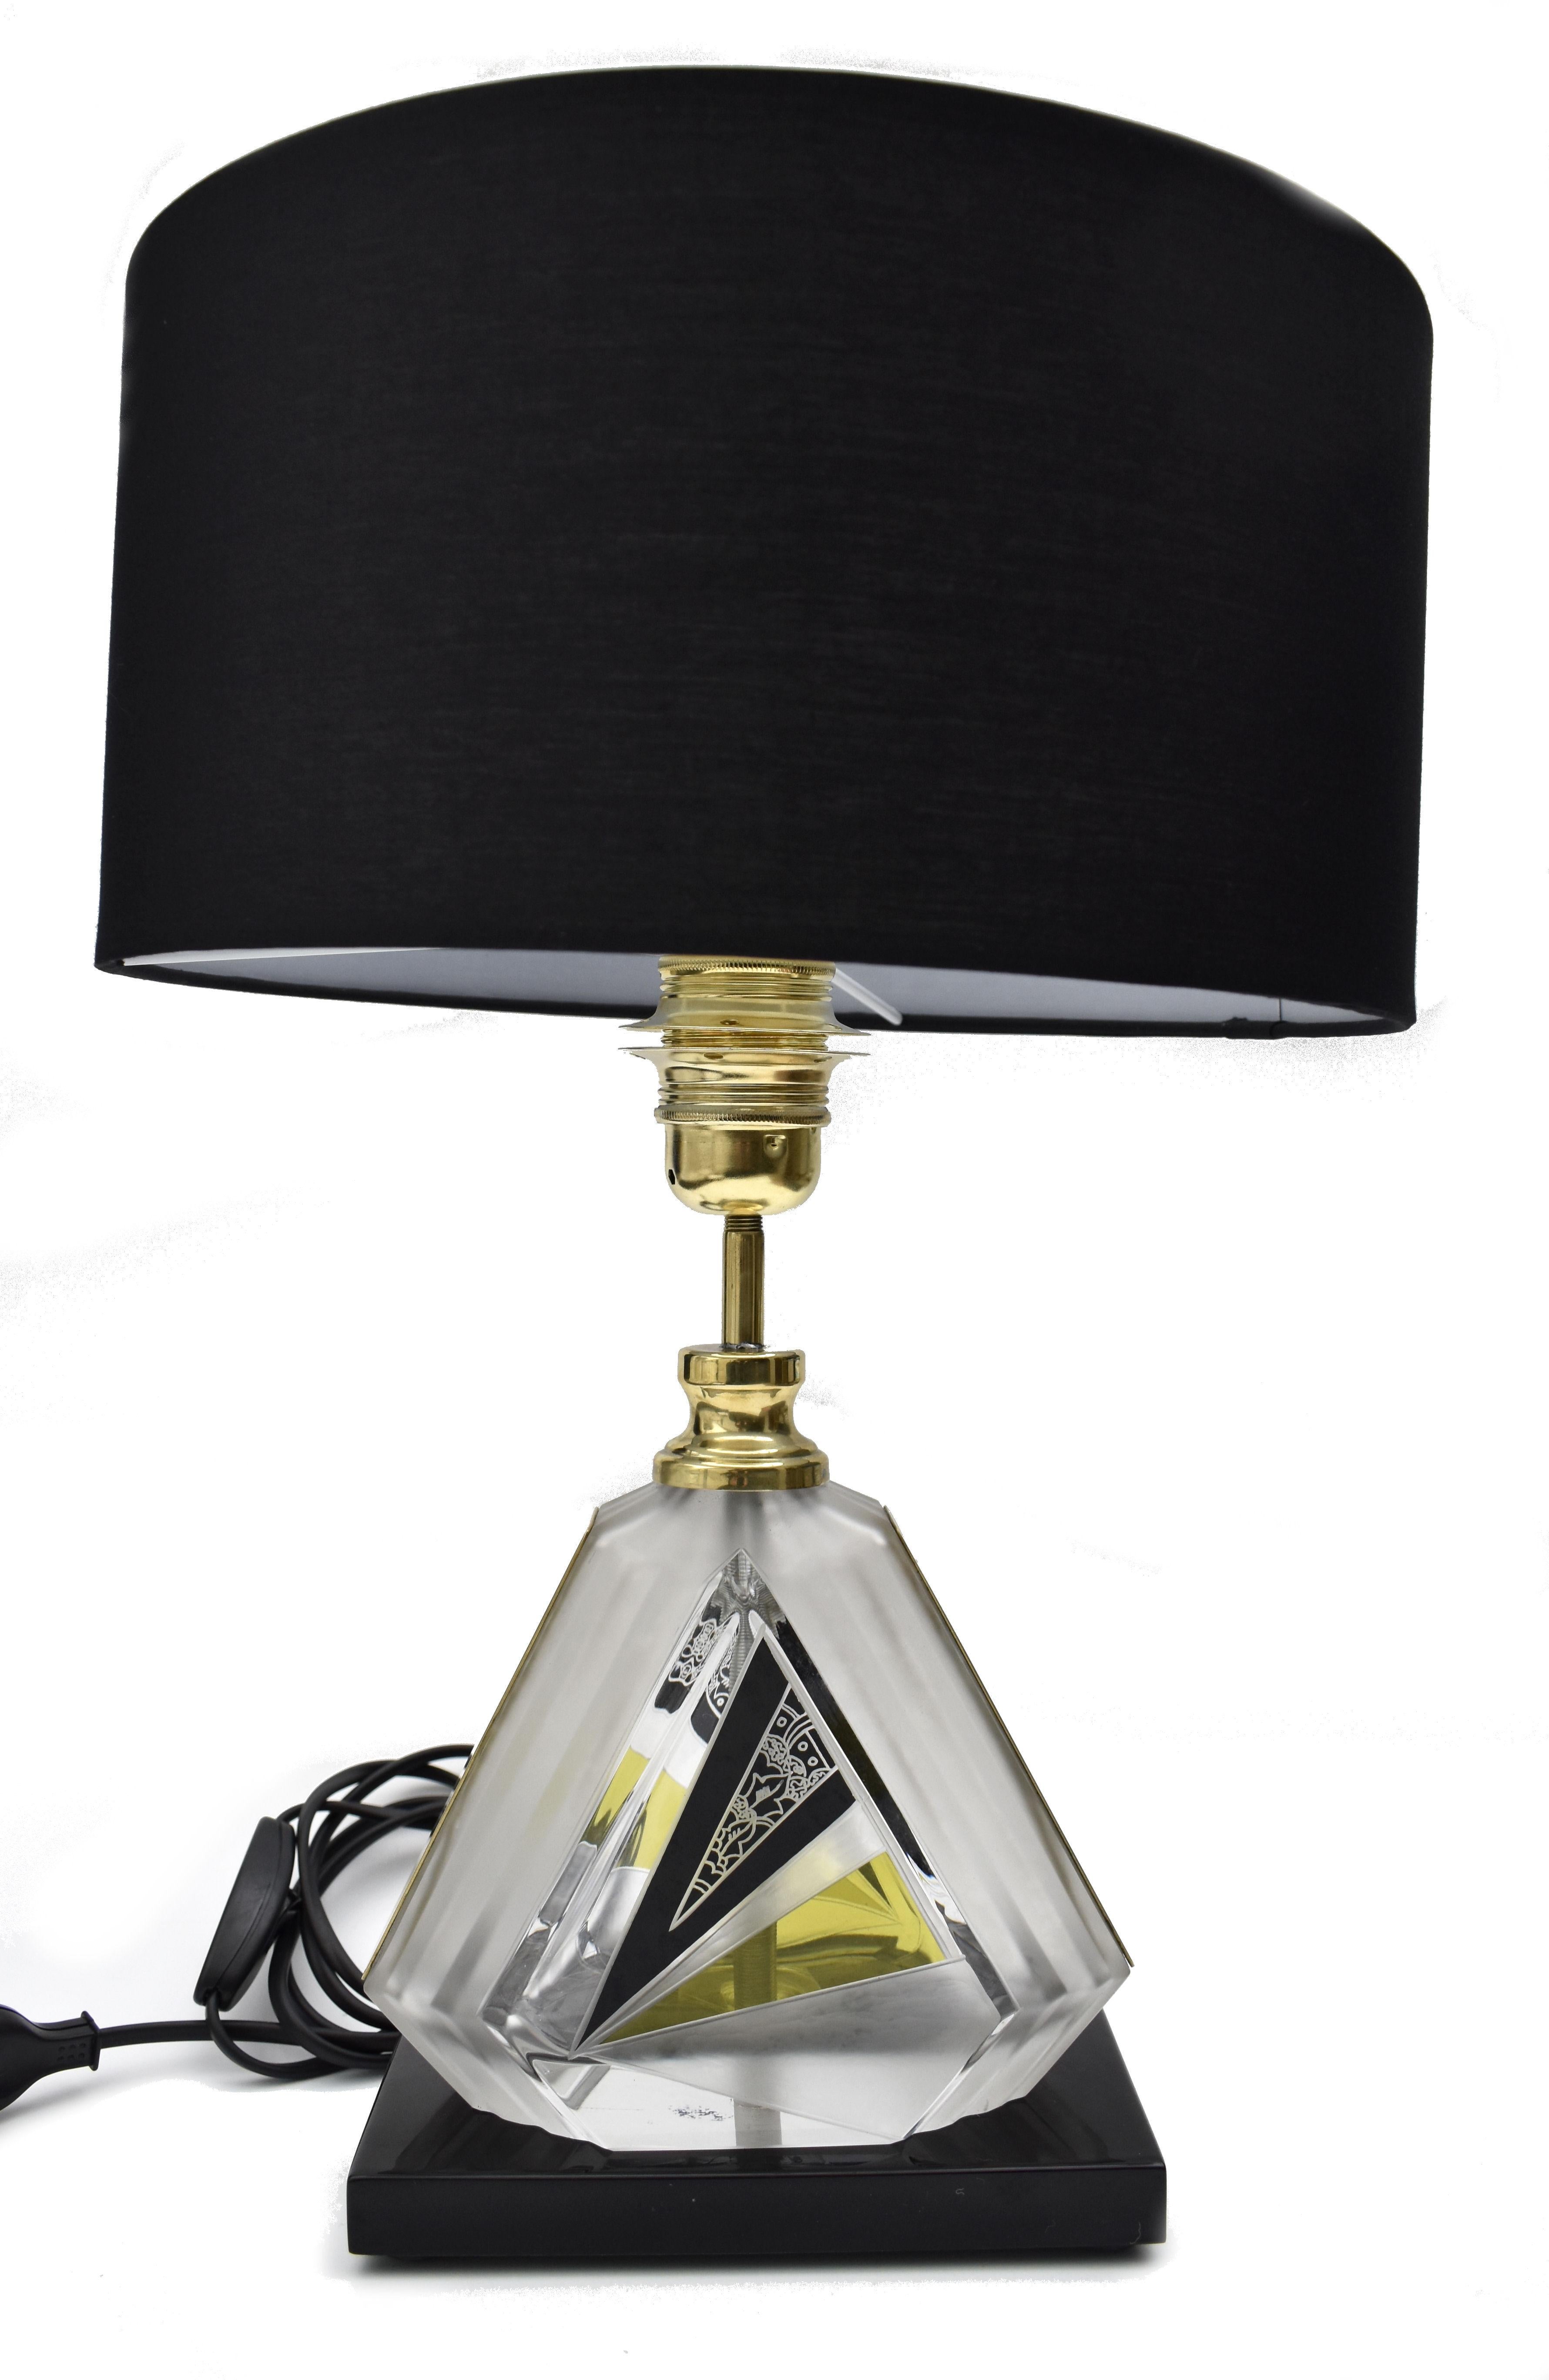 Art Deco Iconic Glass Table Lamp By Karl Palda, c1930 For Sale 2